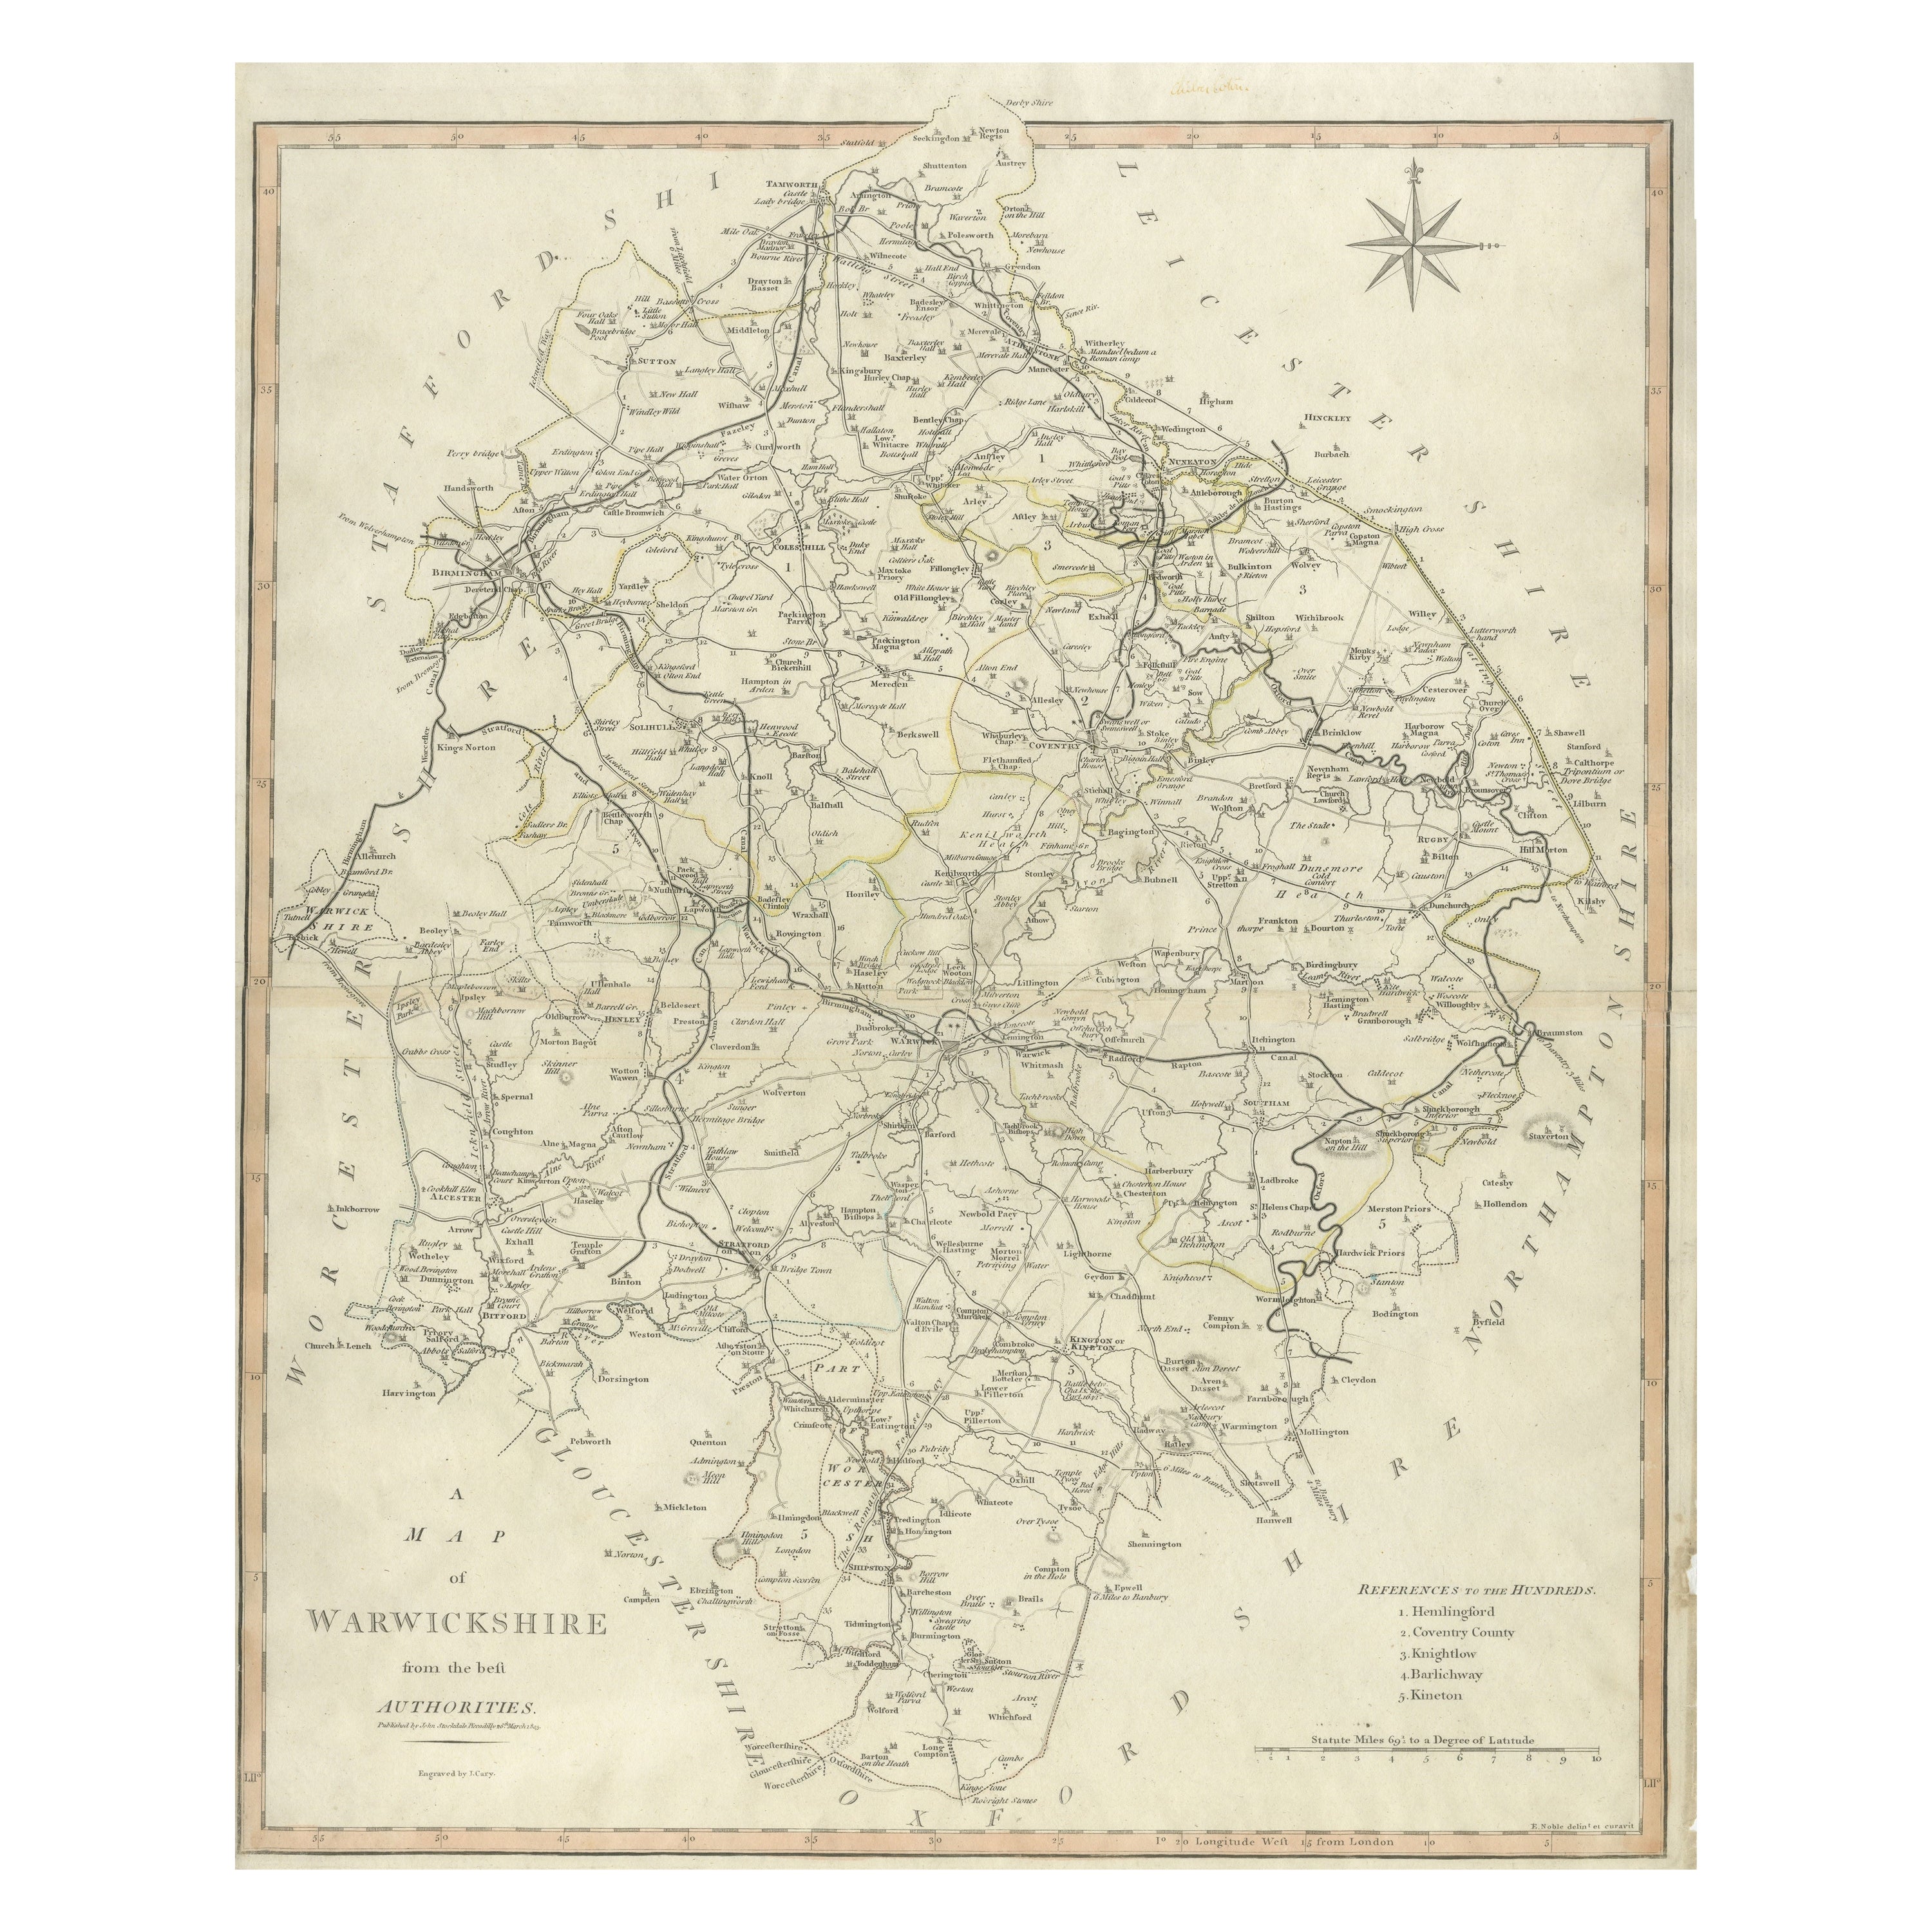 Large Antique County Map of Warwickshire, England, with Hand Coloring